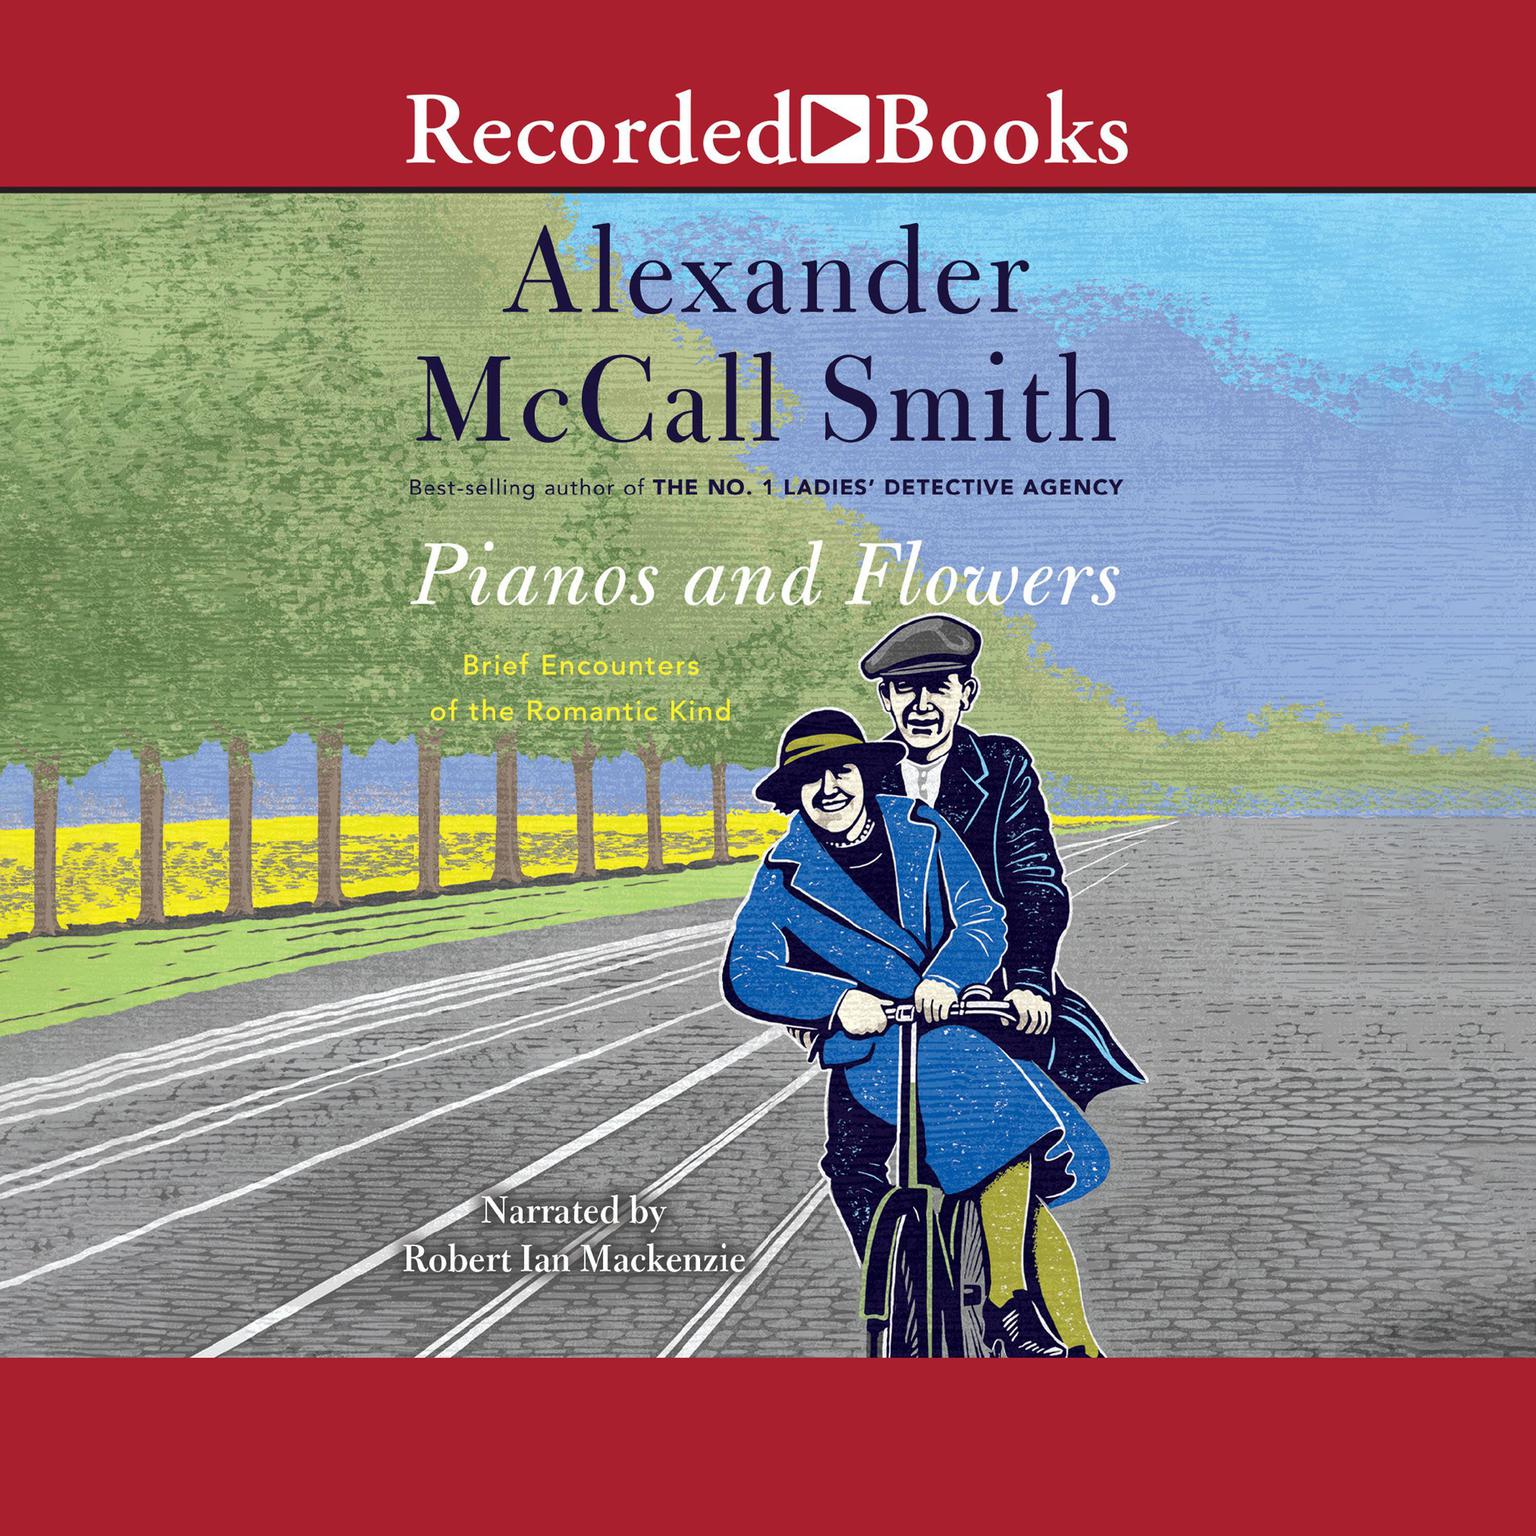 Pianos and Flowers: Brief Encounters of the Romantic Kind Audiobook, by Alexander McCall Smith